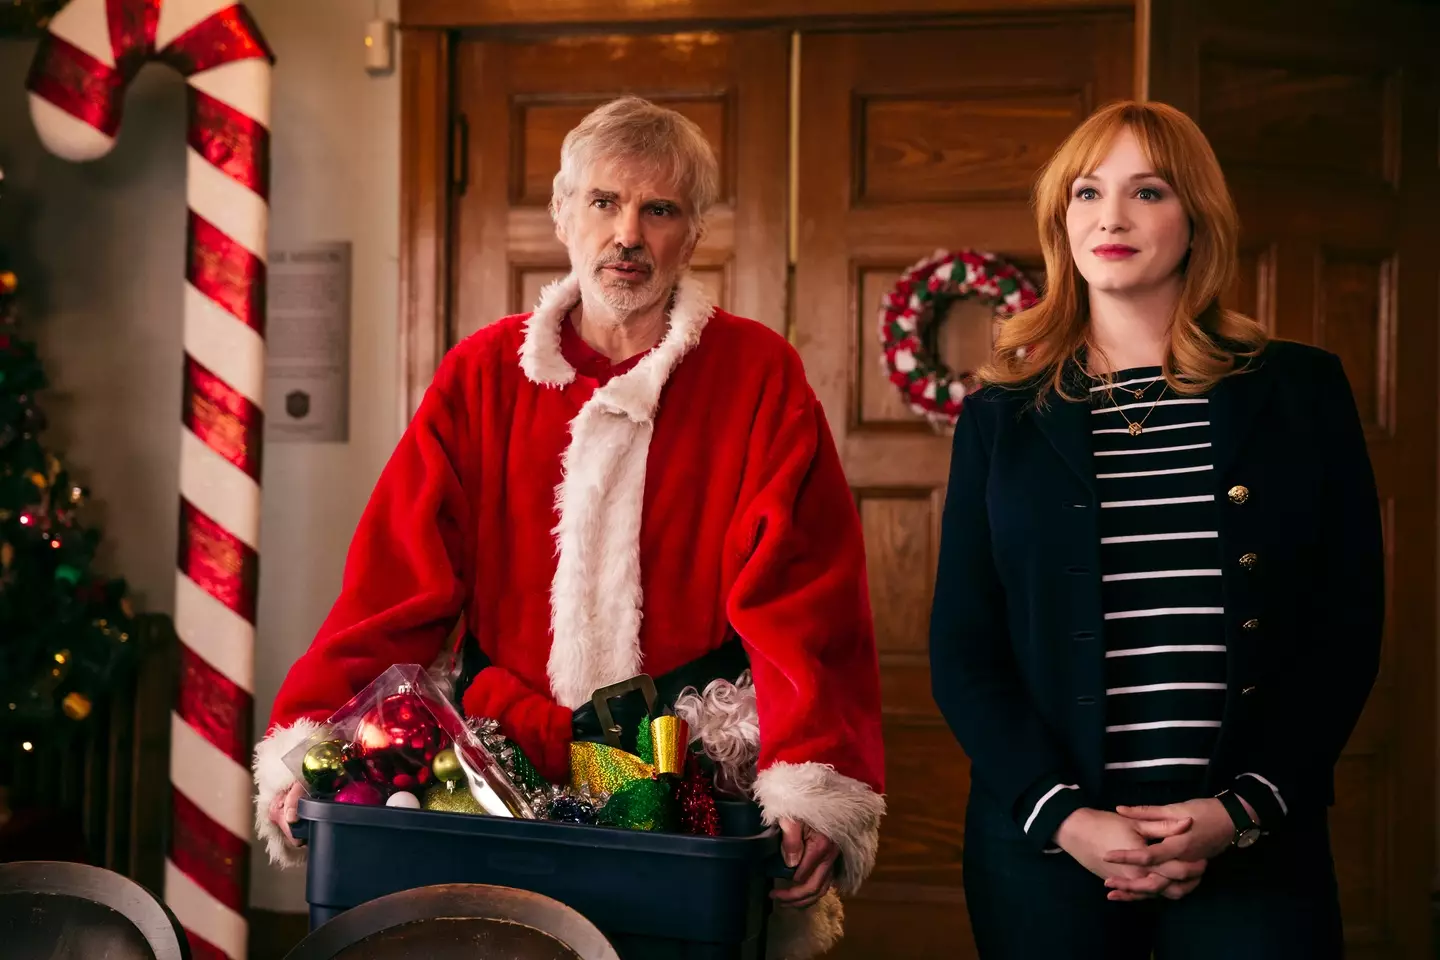 It’s your last chance to watch Bad Santa 2.